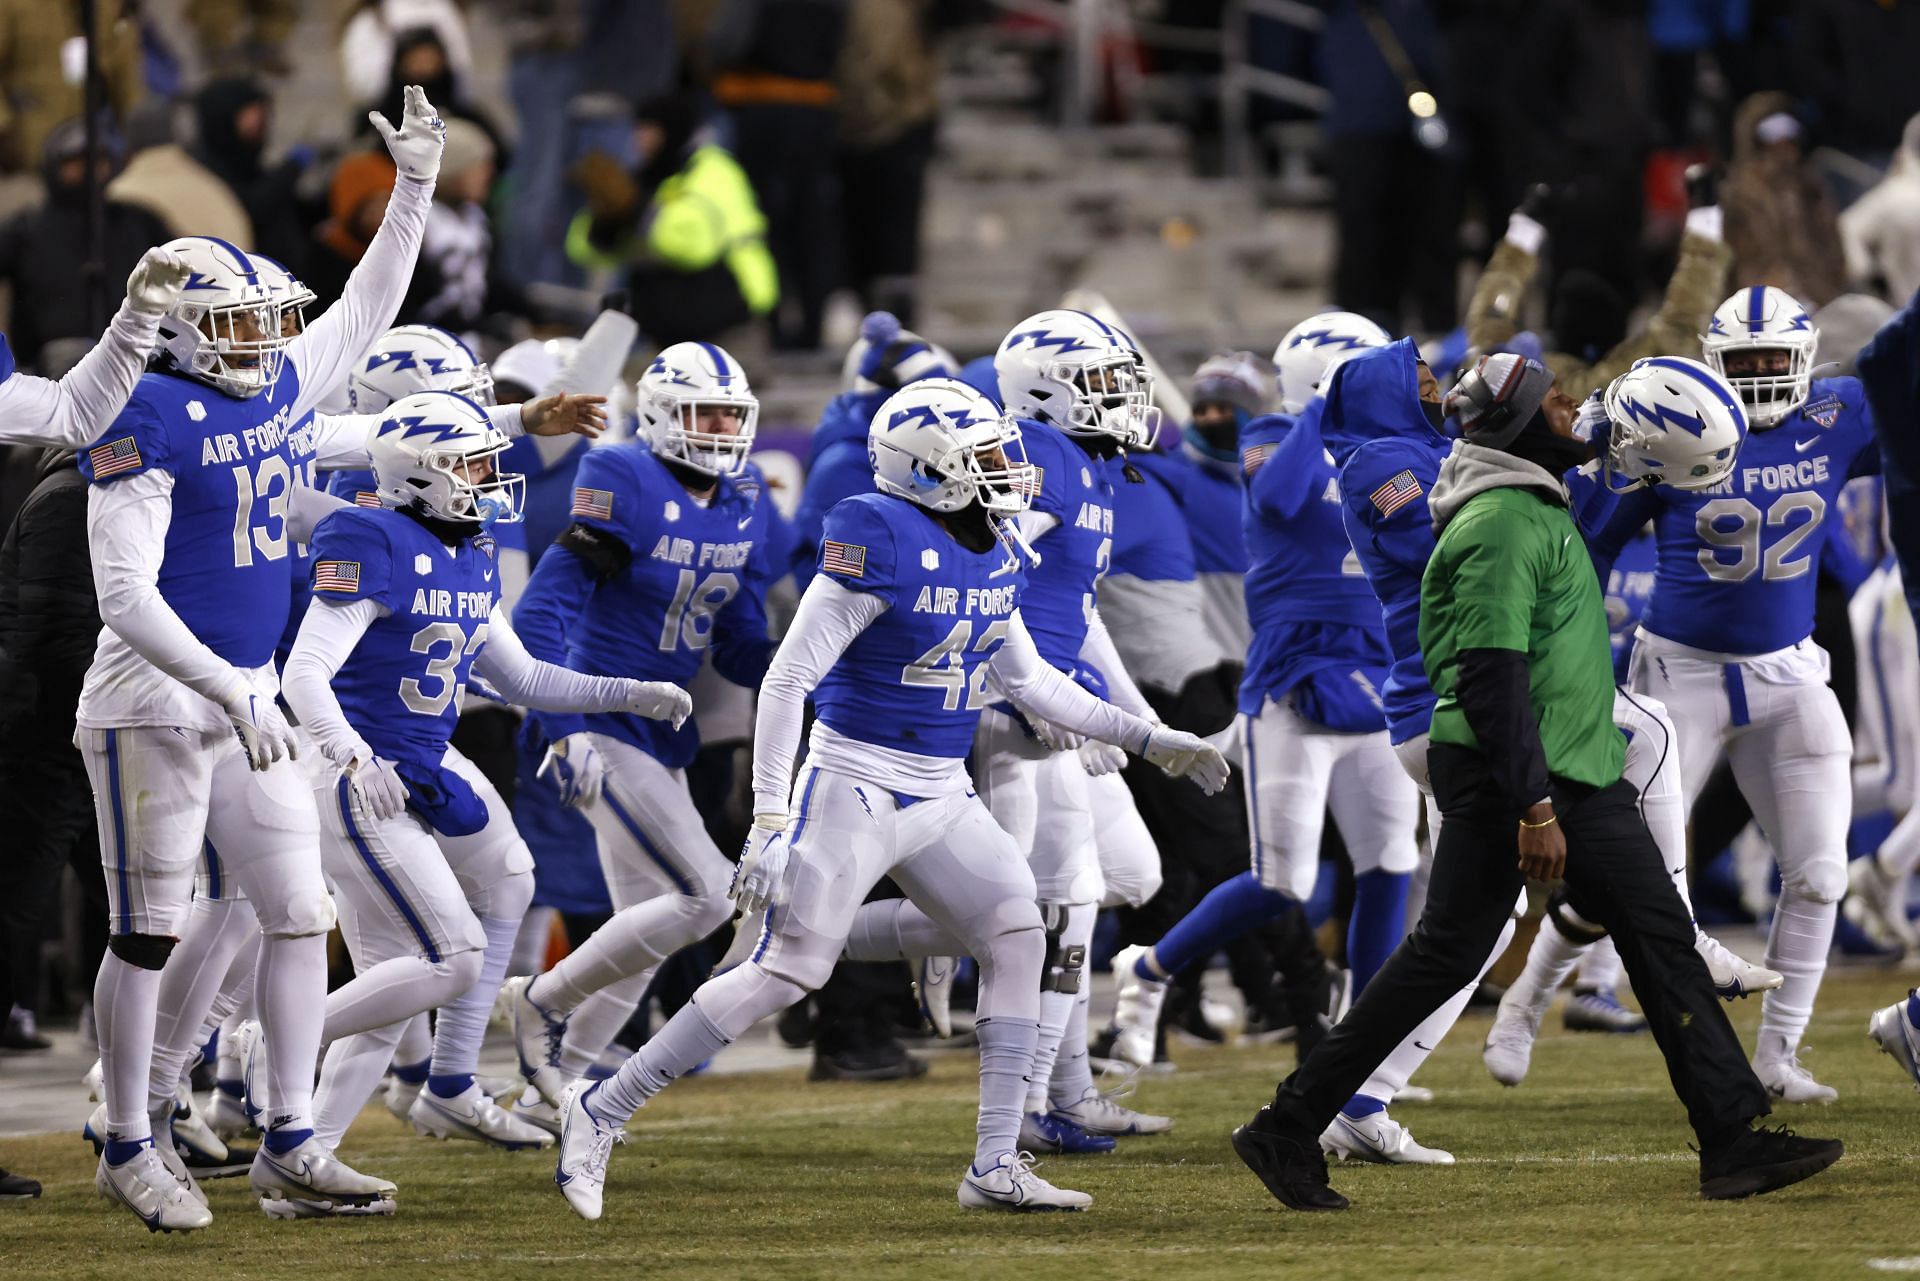 Air Force Senior QB Jensen Jones will step in, as Zac Larrier recovers from  knee injury